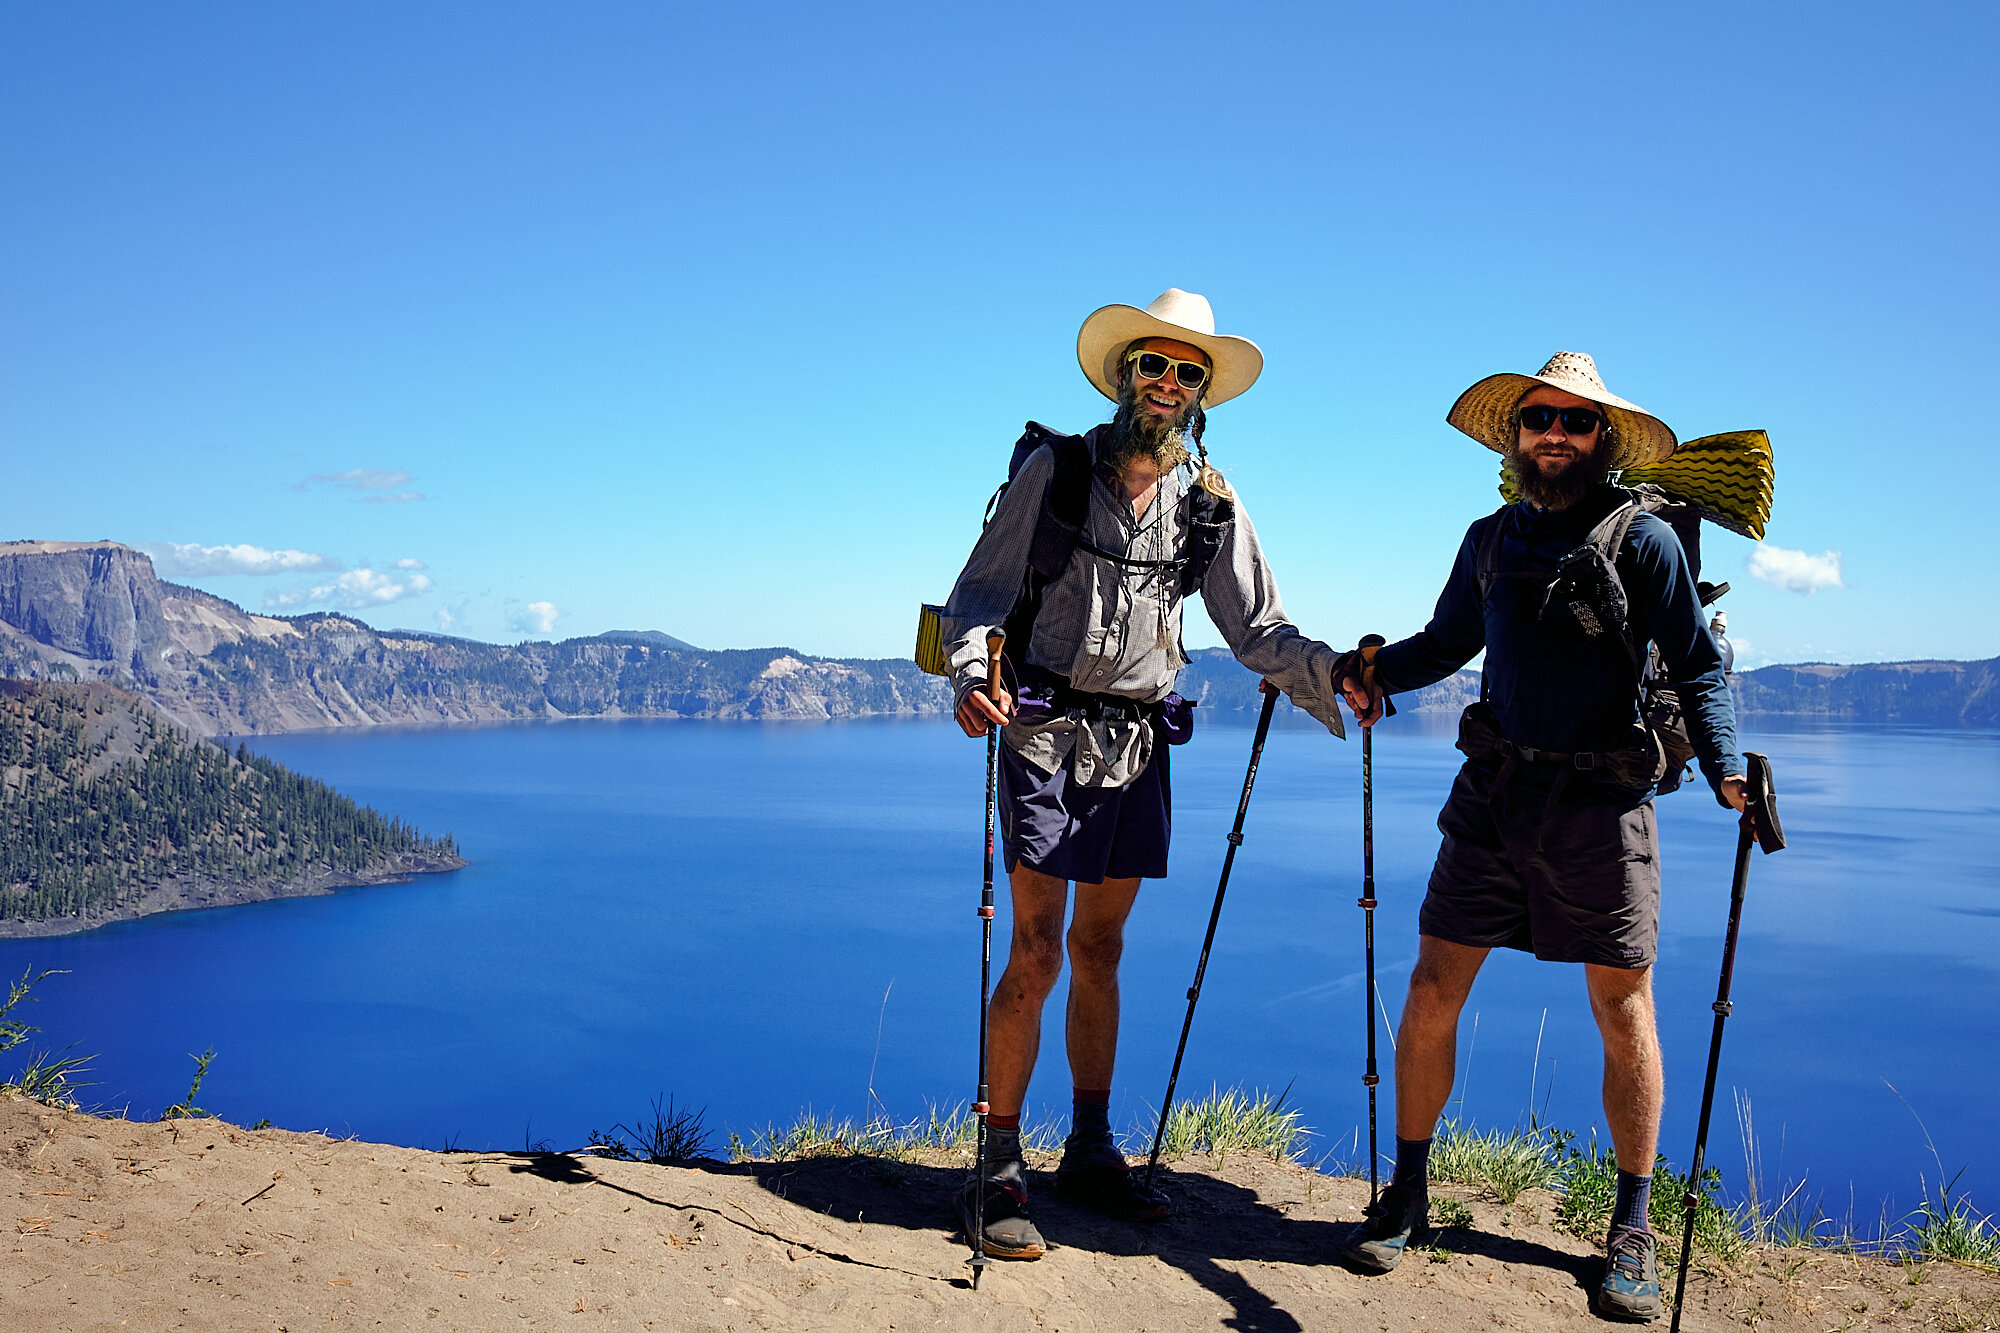  Lebowski and I pose on the rim of Crater Lake, the deepest lake in the United States. | 8/30/19 Mile 1,823.0, 6,093' 